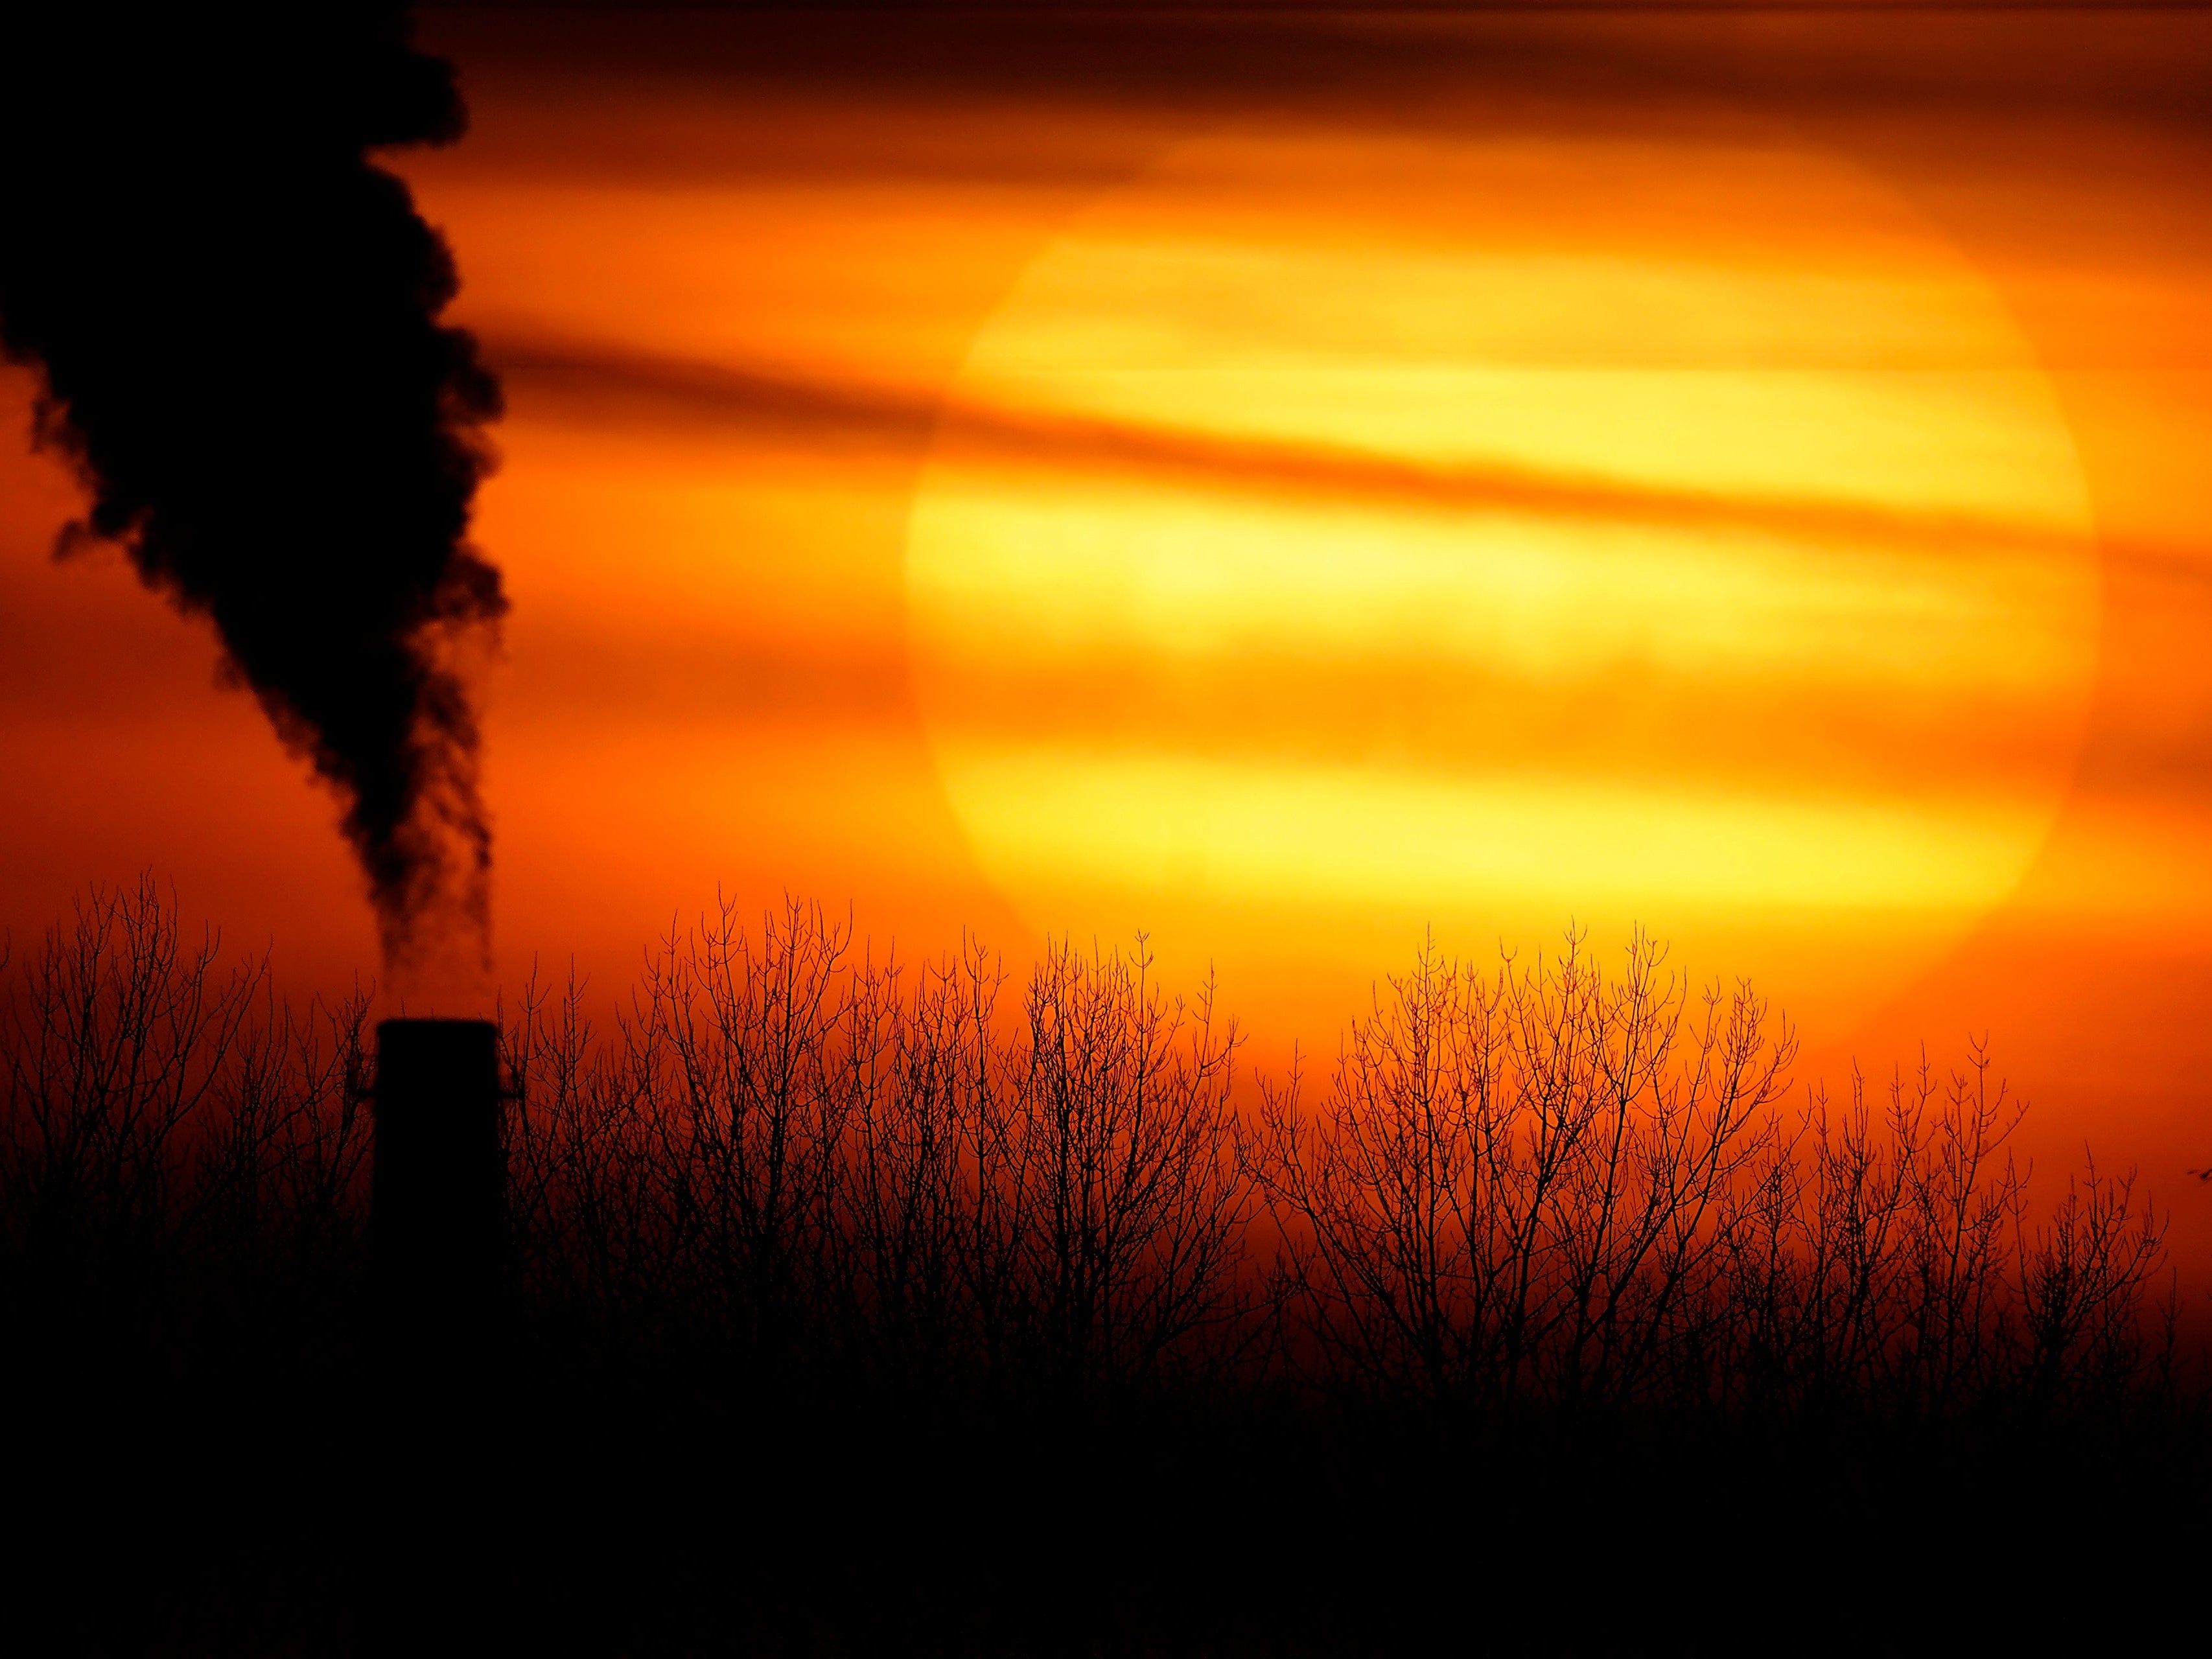 More needs to be done to reduce the use of fossil fuels